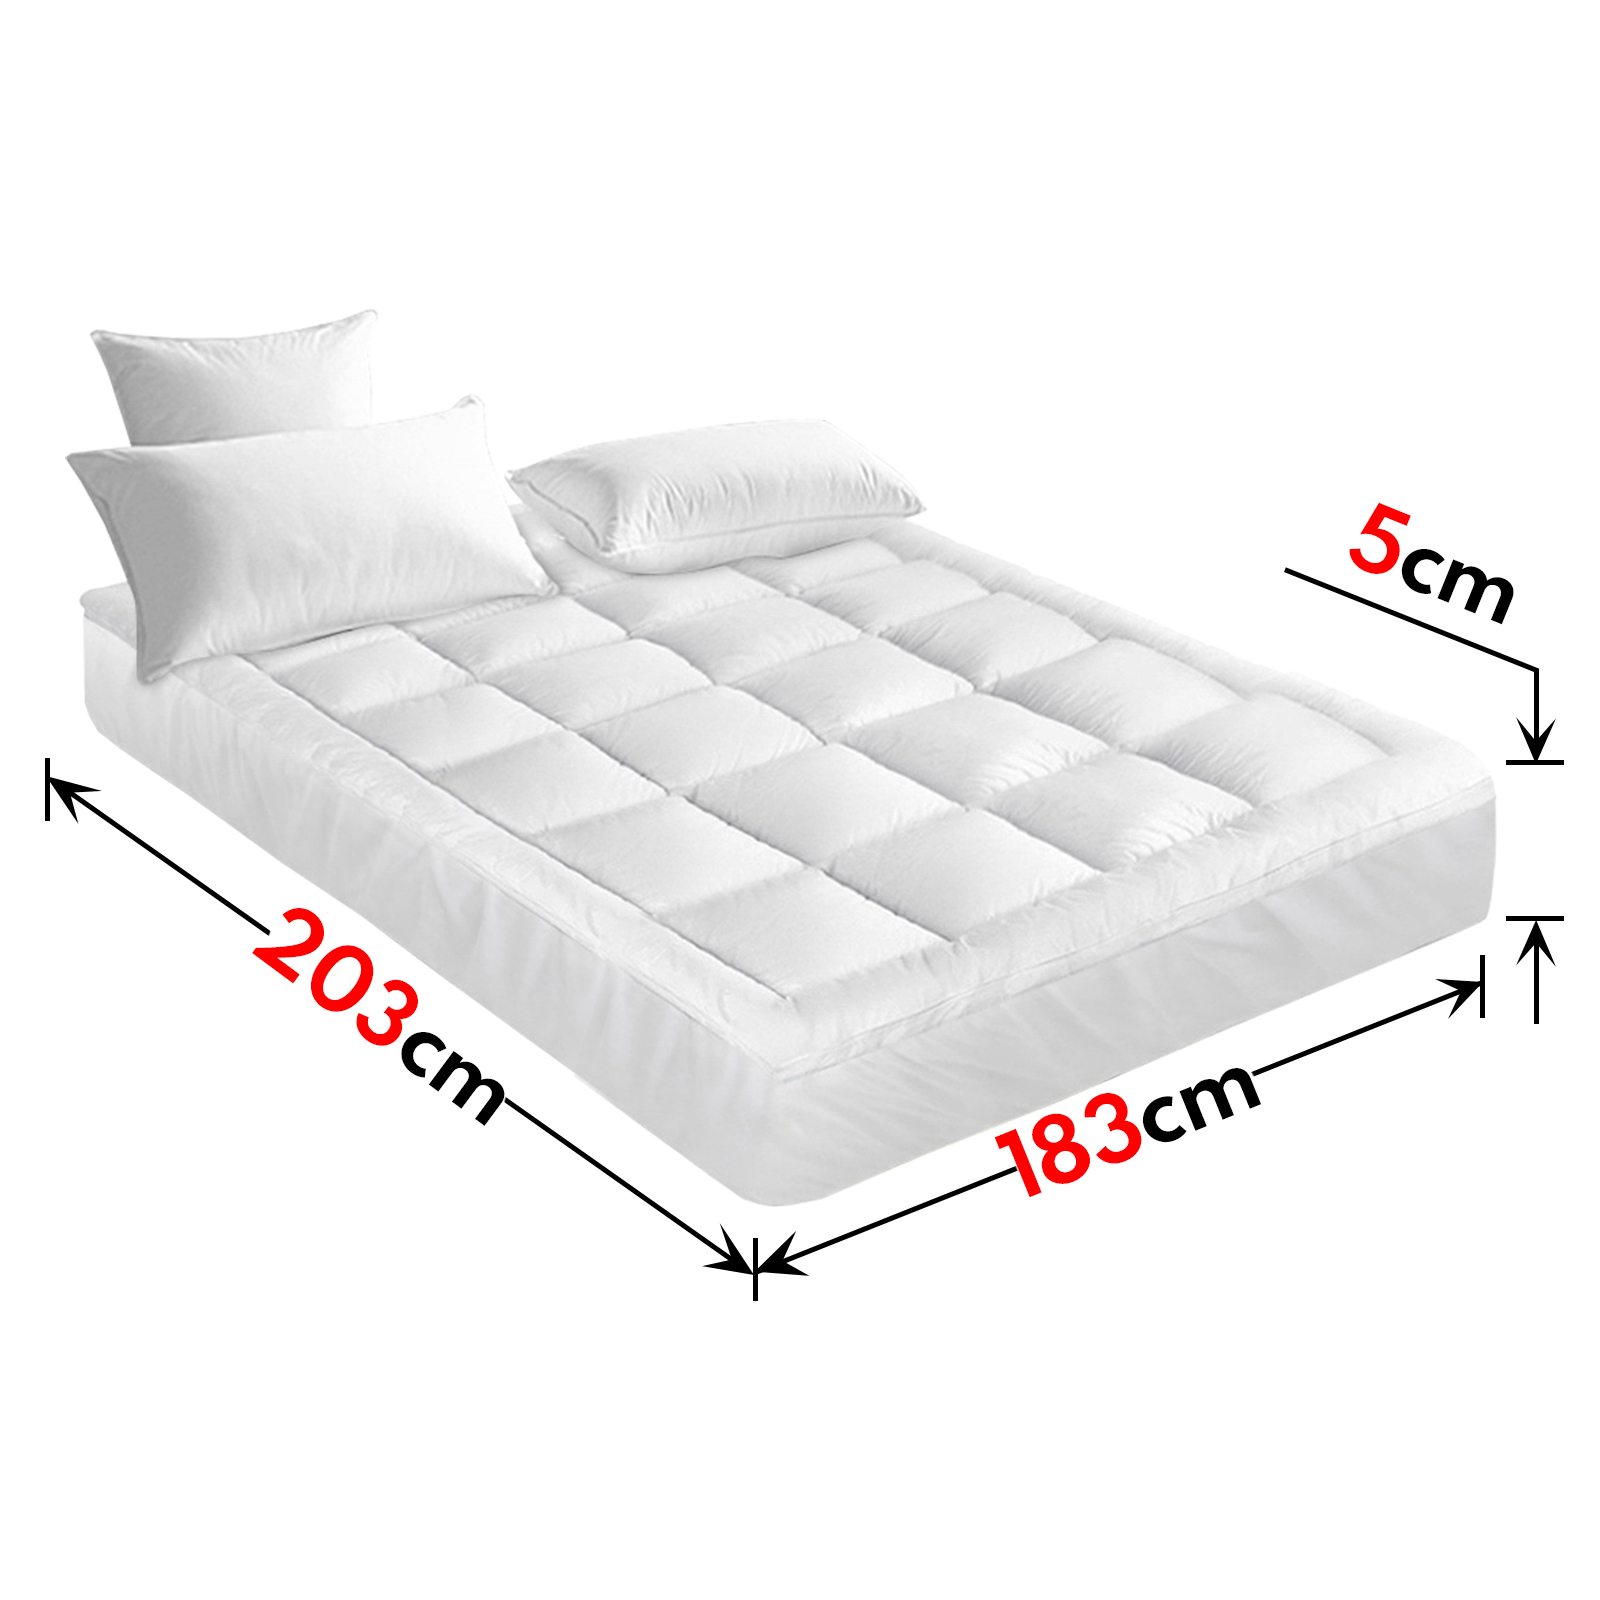 King Mattress Bed Topper Bamboo Fibre Pillowtop Protector Soft 5cm Thick